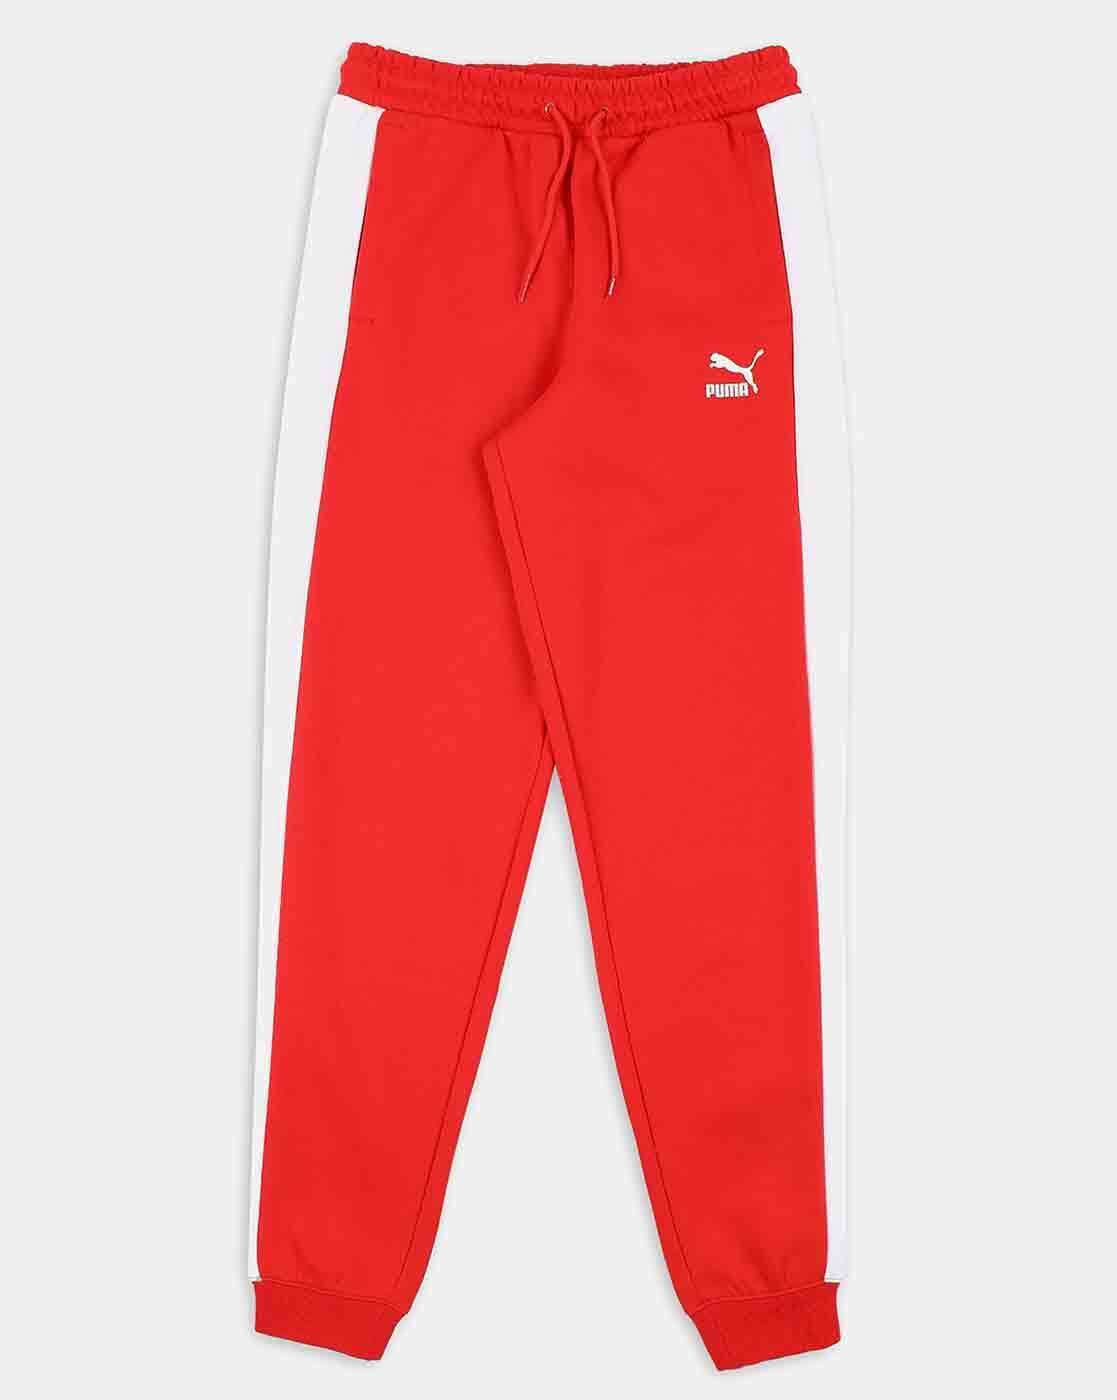 Nike Mens Sportswear Am Taped Track Pants Red  ModeSens  Mens  sportswear Nike men Pants